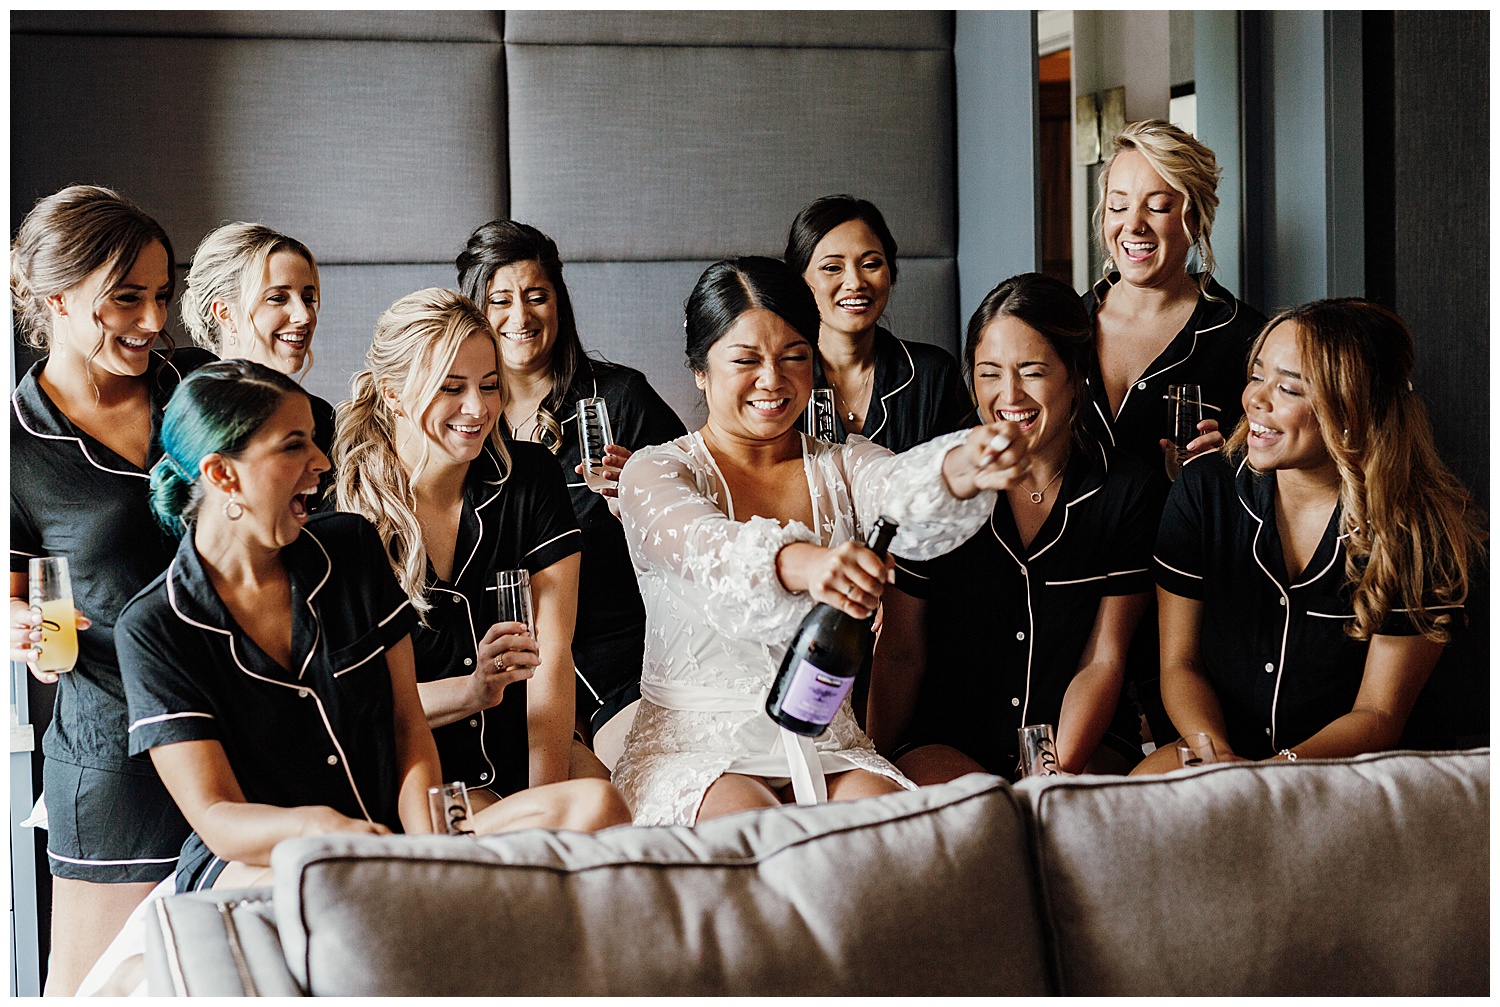 bride popping champagne bottle with bridesmaids, Nashville wedding photography, Country Music Hall of Fame wedding reception, Tennessee wedding Planning, Wedding Inspiration, Downtown Nashville